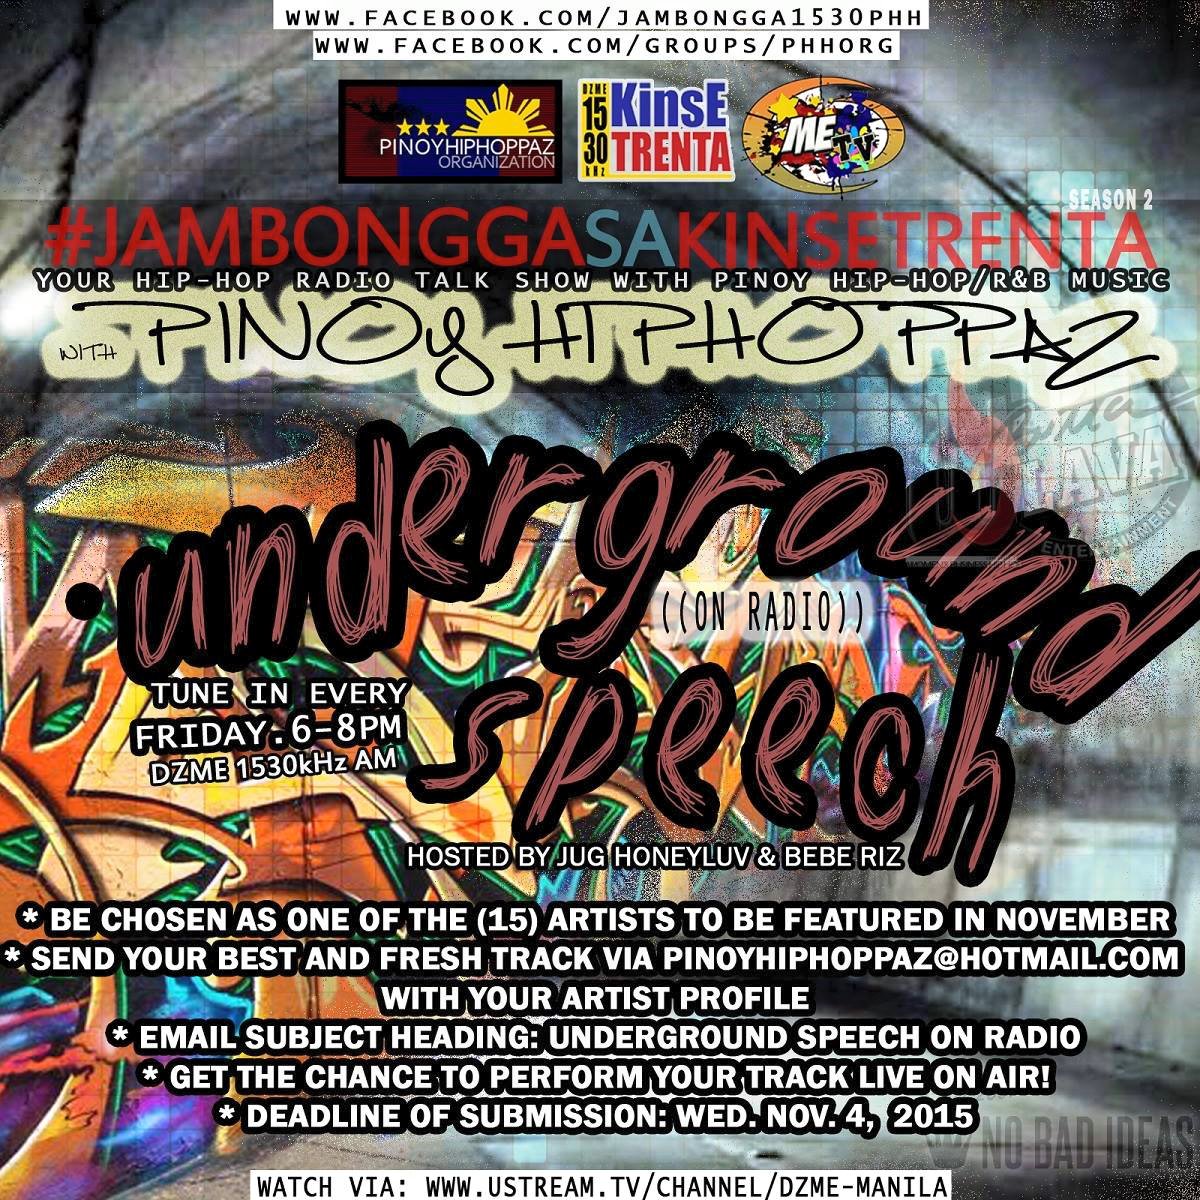 Jambongga sa Kinse Trenta - Pinoy Hiphoppaz #SOON "Underground Speech on Radio" at #JambonggaSaKinseTrentaPHH will feature 15 Rap artists in November. This will be our newest segment every Friday from 6-8PM MNL, featuring the best in undiscovered music of the Philippine Underground Rap Scene. #SUBMIT #NOW #READ #SHARE #PASS If you're interested, best be prepared w/ your best track mixed & mastered, properly! NO YT or SC links. We will only accept mp3 files (320kbps preferred). Mechanics: *Be chosen as 1 of the 15 artists to be featured in November *Send your best & fresh track via pinoyhiphoppaz@hotmail.com w/ your artist profile *E-mail Subject Heading: Underground Speech on Radio *Get the chance to perform your track live, on-air! *Deadline of submission: Wednesday, Nov. 4, 2015 *Start Date: Nov. 6, 2015